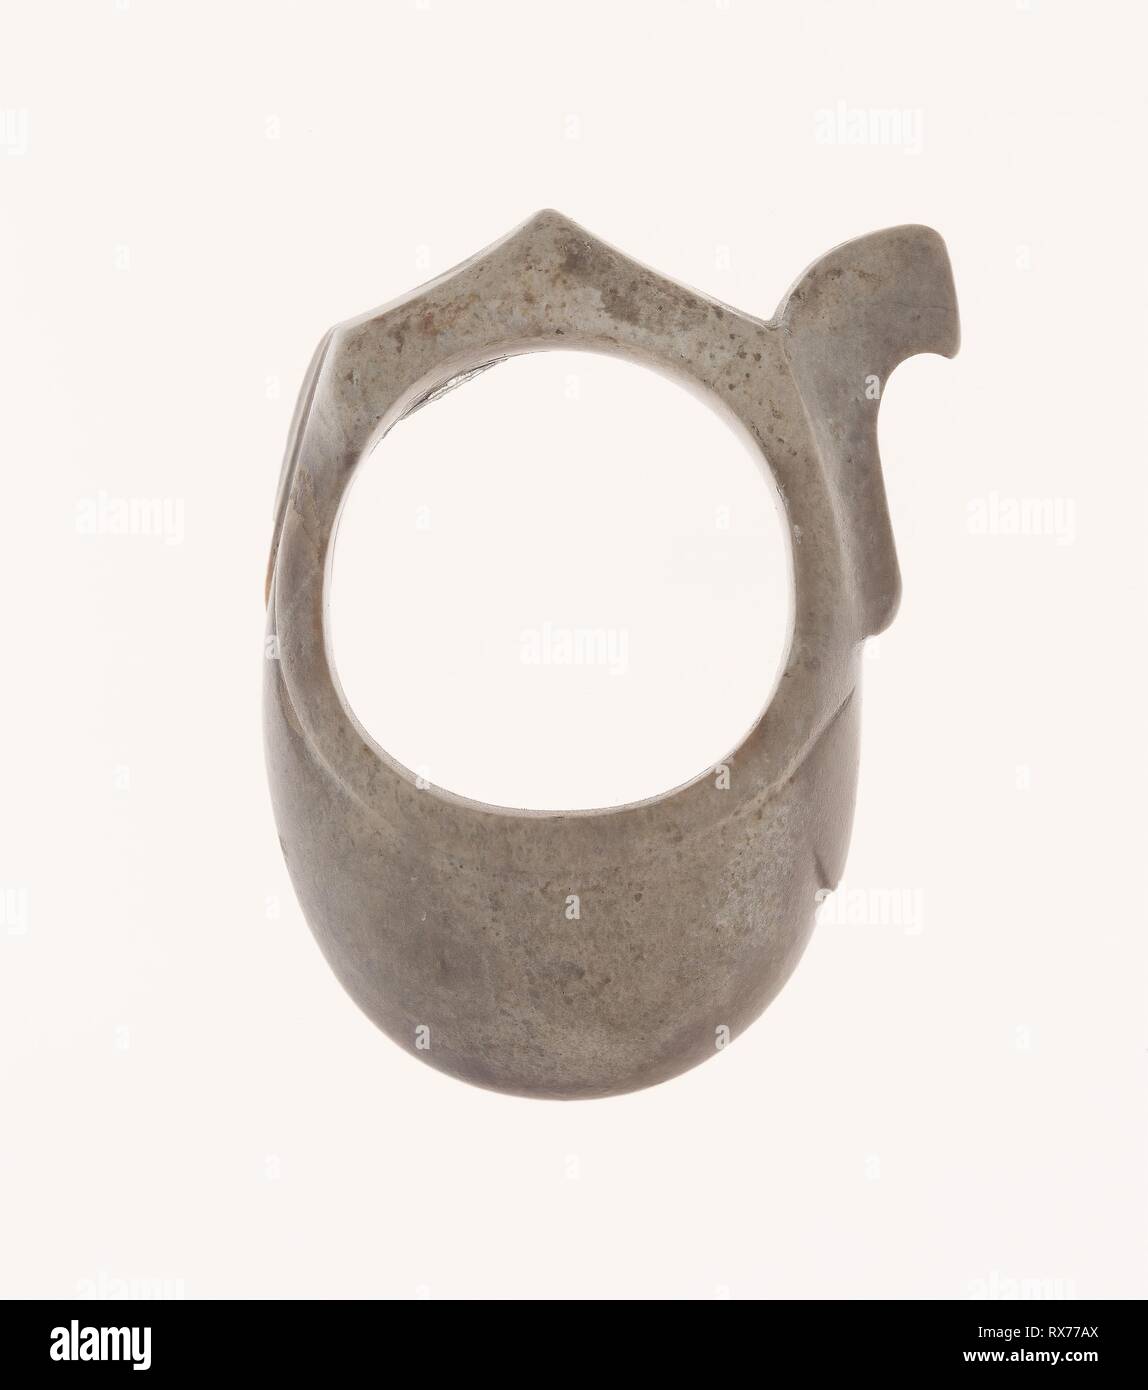 Archer's thumb ring. China. Date: 500 BC-300 BC. Dimensions: 4.1 × 3.2 × 1.0 cm (1 5/8 × 1 1/4 × 3/8 in.). Jade. Origin: China. Museum: The Chicago Art Institute. Stock Photo